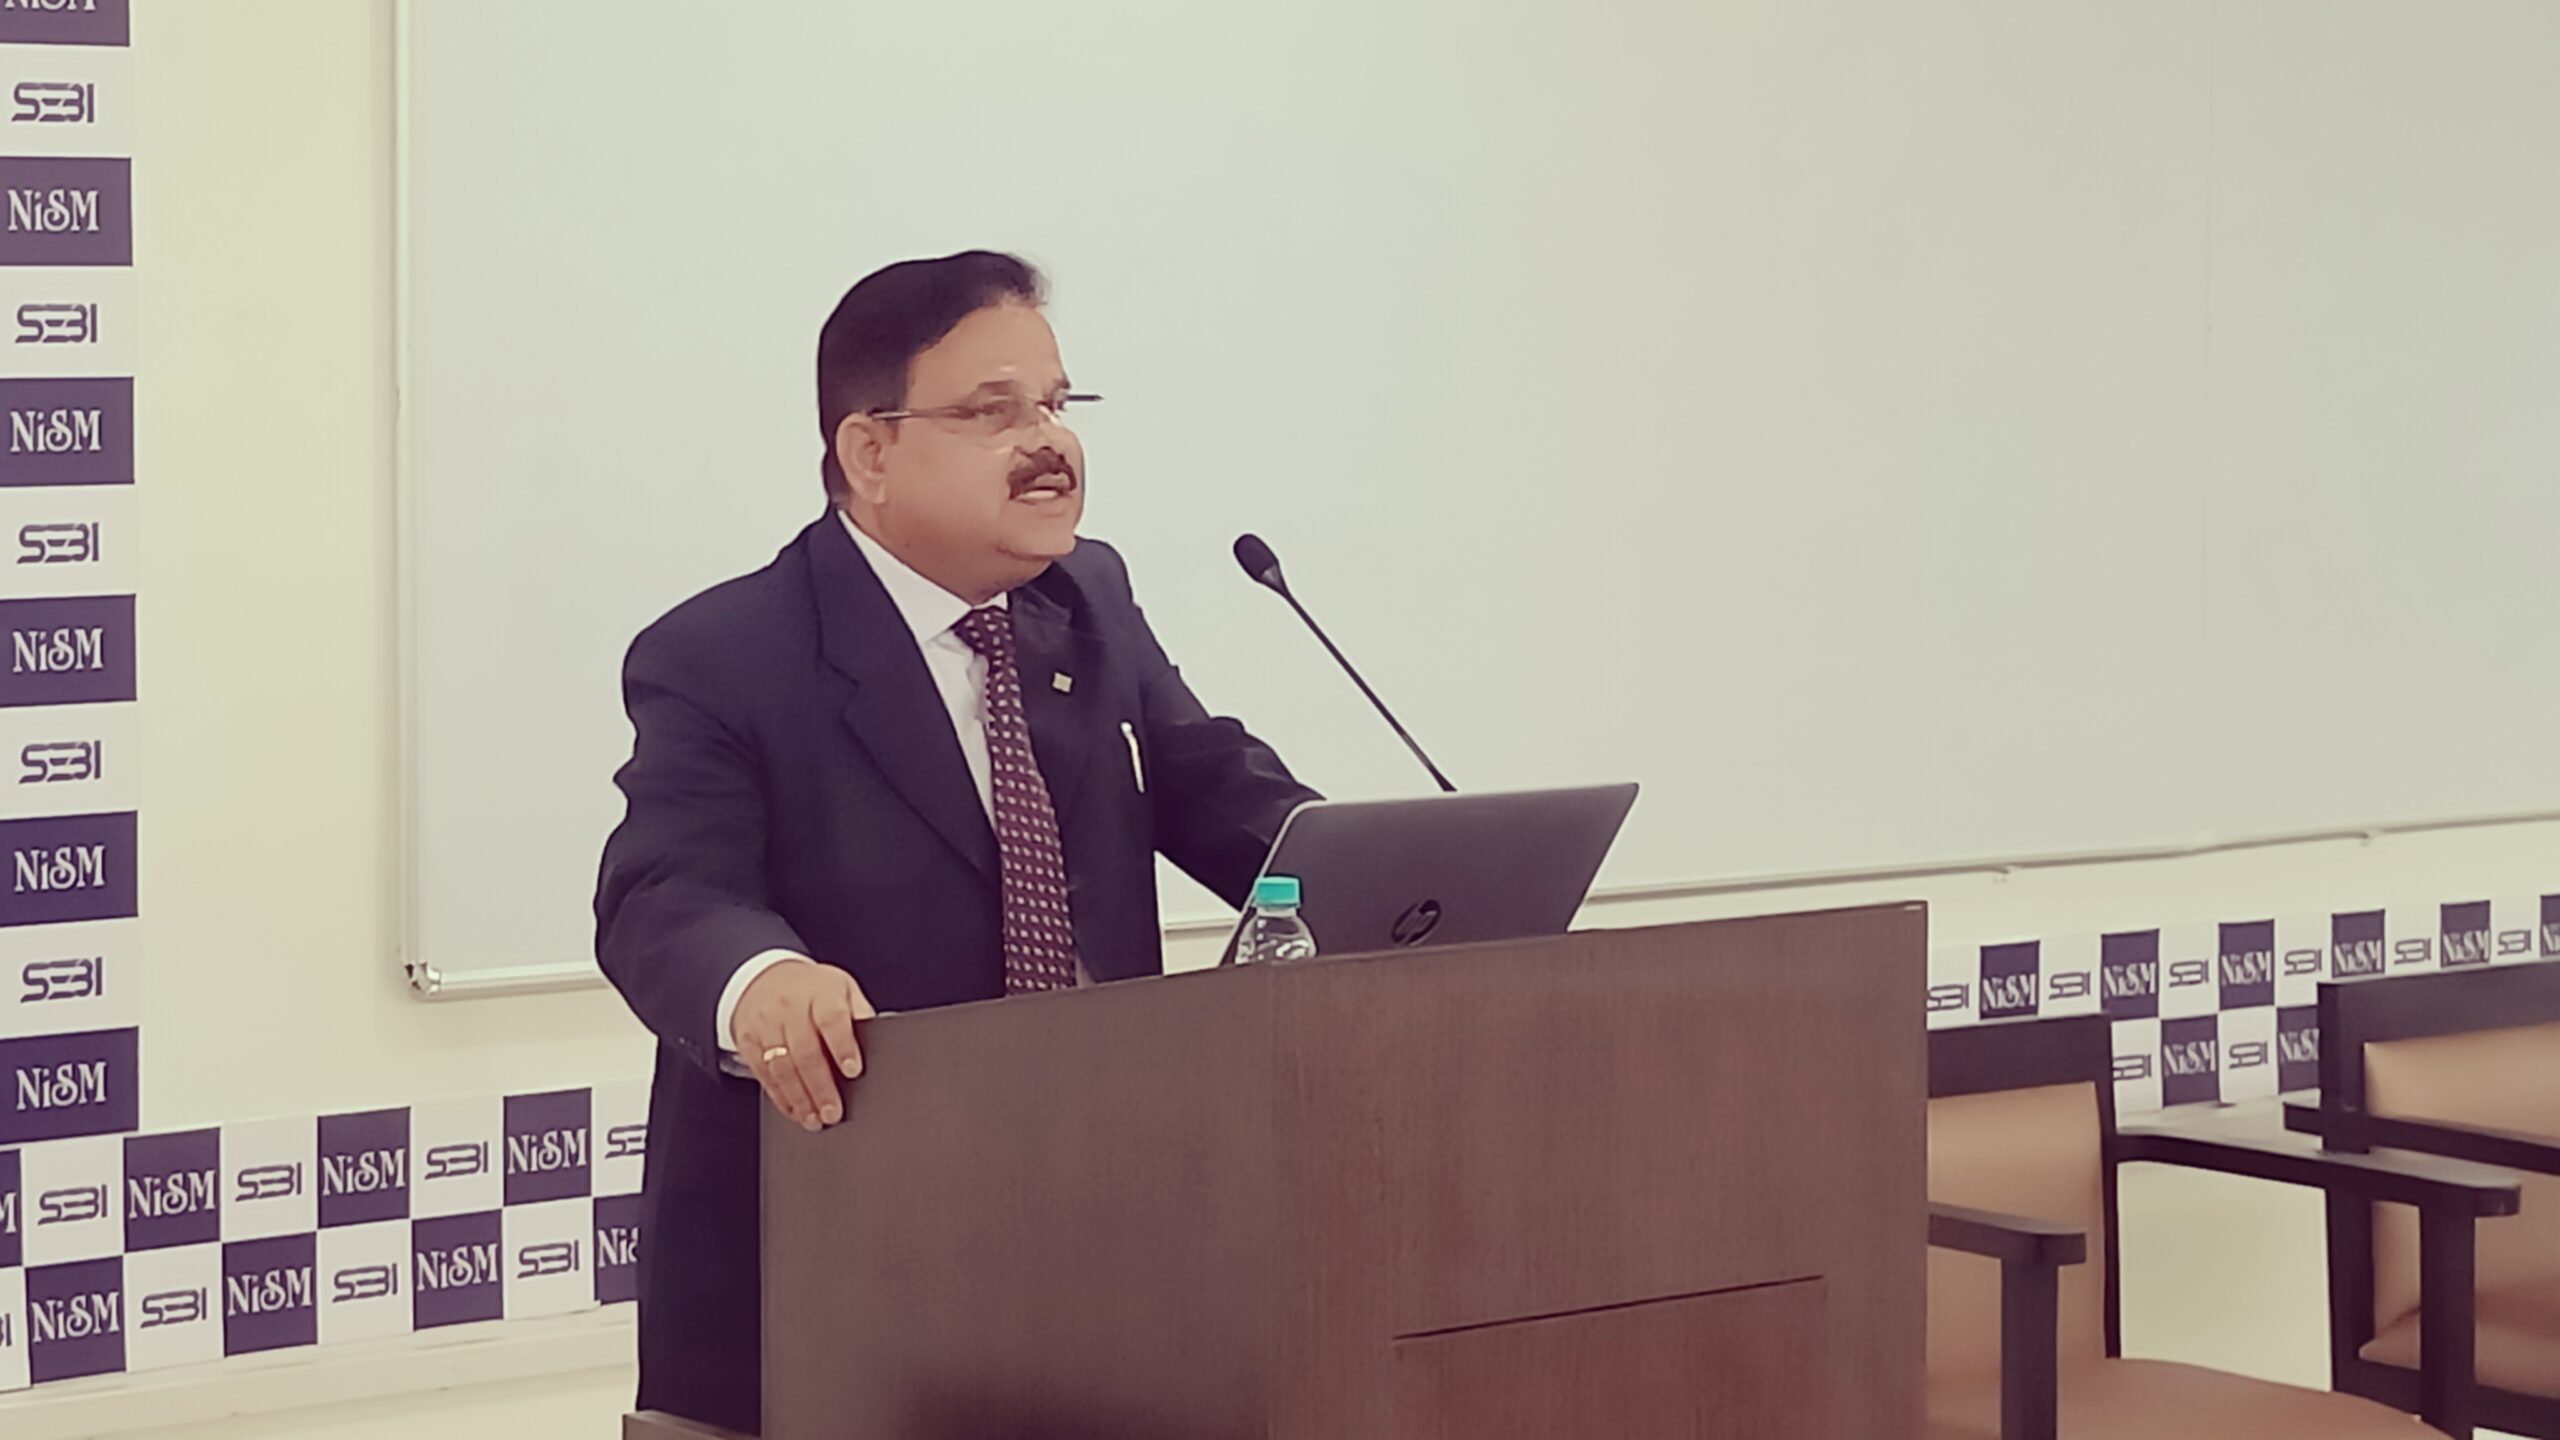 NCAER IEPF Chair Professor Dr C.S. Mohapatra Addresses Students at National Institute of Securities Markets, Mumbai